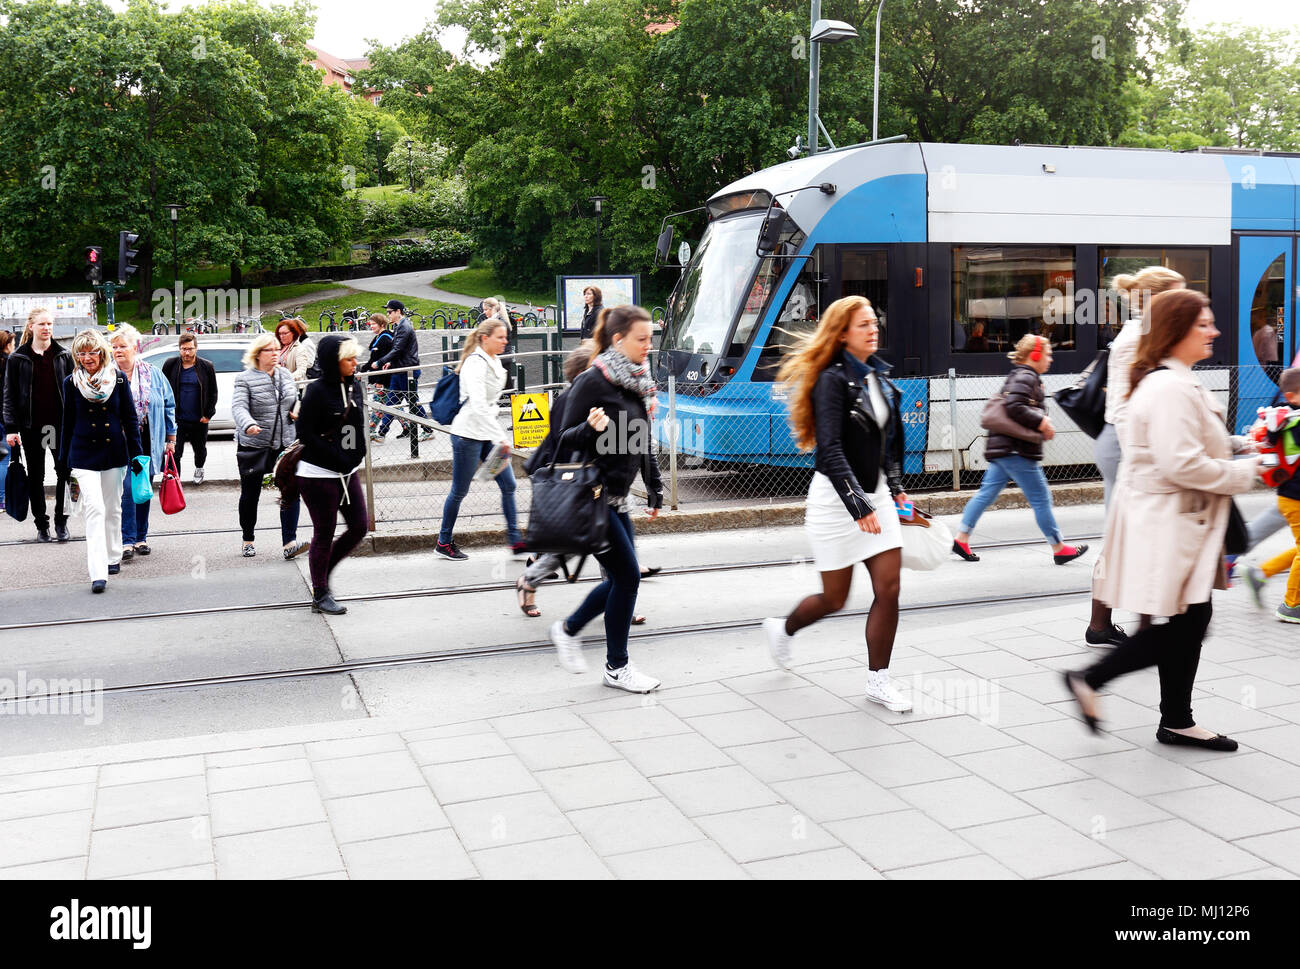 Stockholm, Sweden - June 10, 2015: Morning rush at tram stop at Liljeholmen with people walking from the tram at the public transport exchange hub Lil Stock Photo